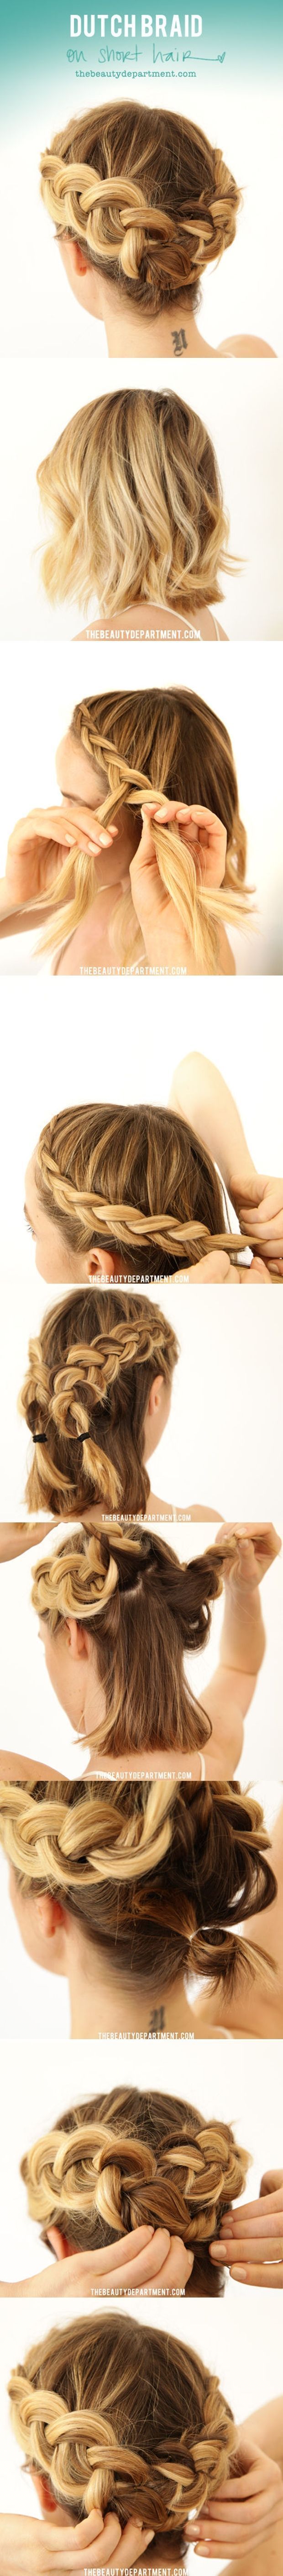 I’ll show you how we did dutch braid on short hair, you could really see detai...